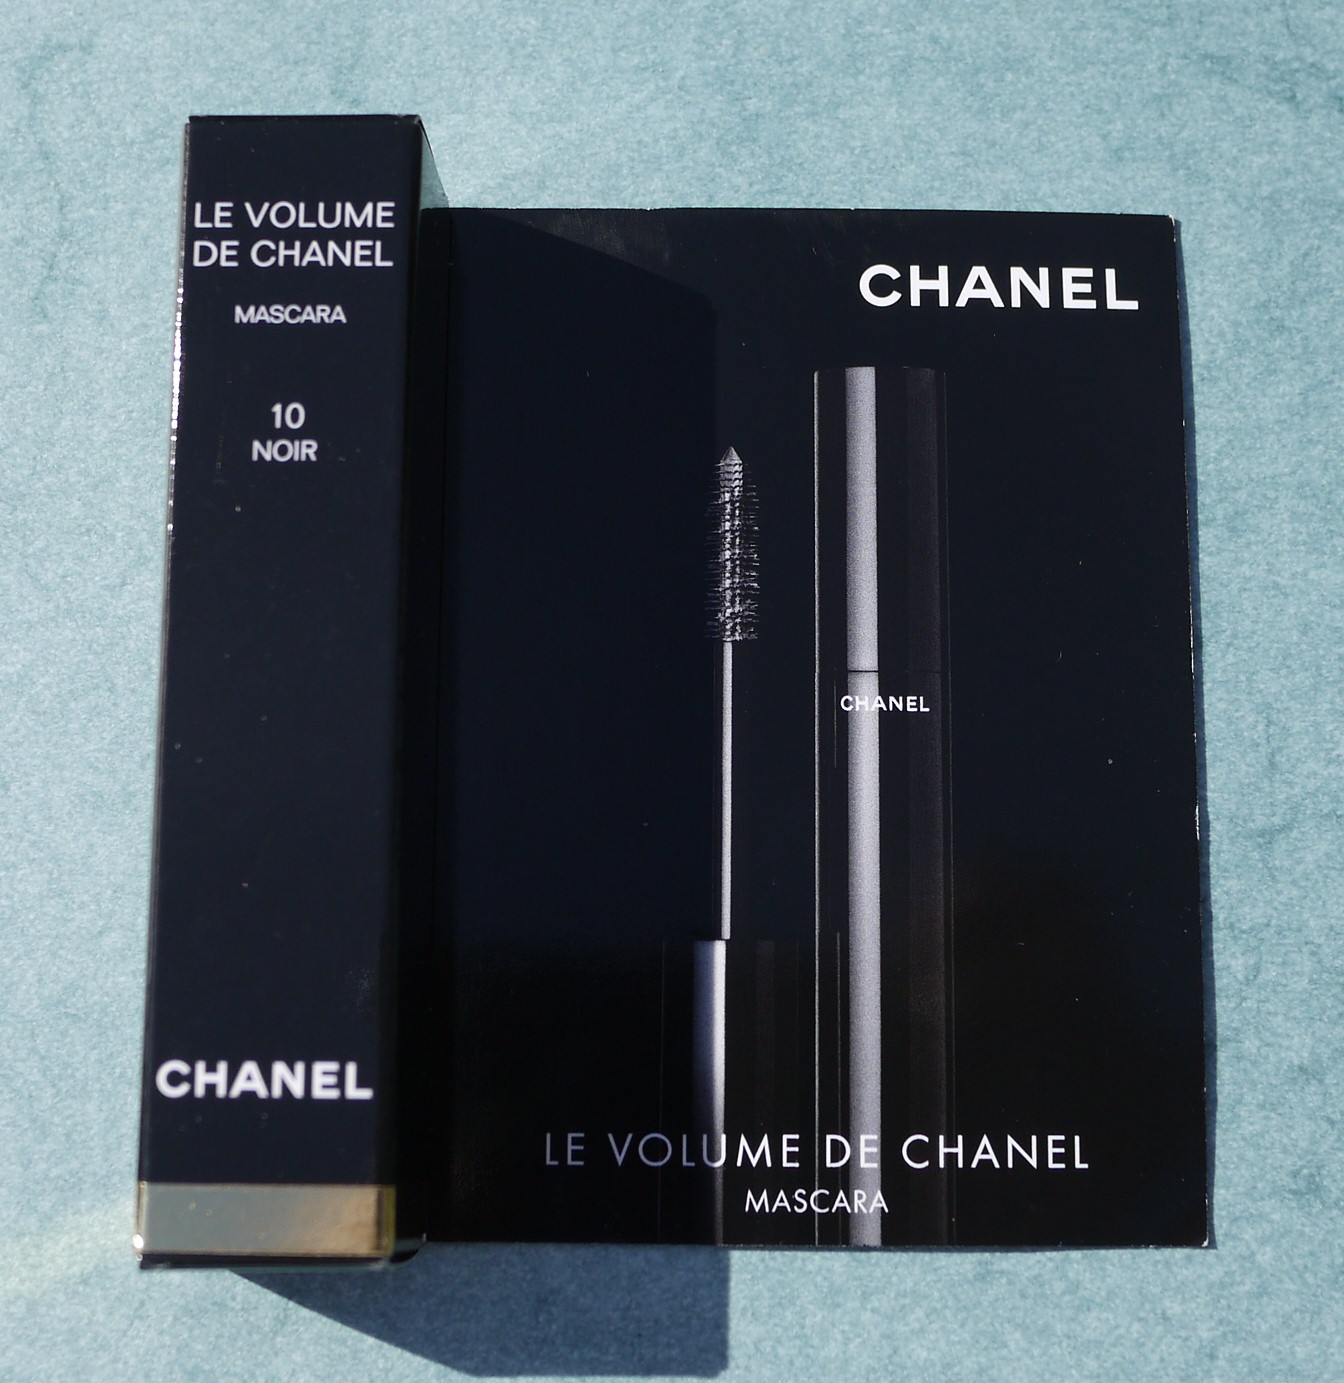 Best Things in Beauty: Flash Giveaway Contest: Chanel Le Volume de Chanel  Mascara Deluxe Sample